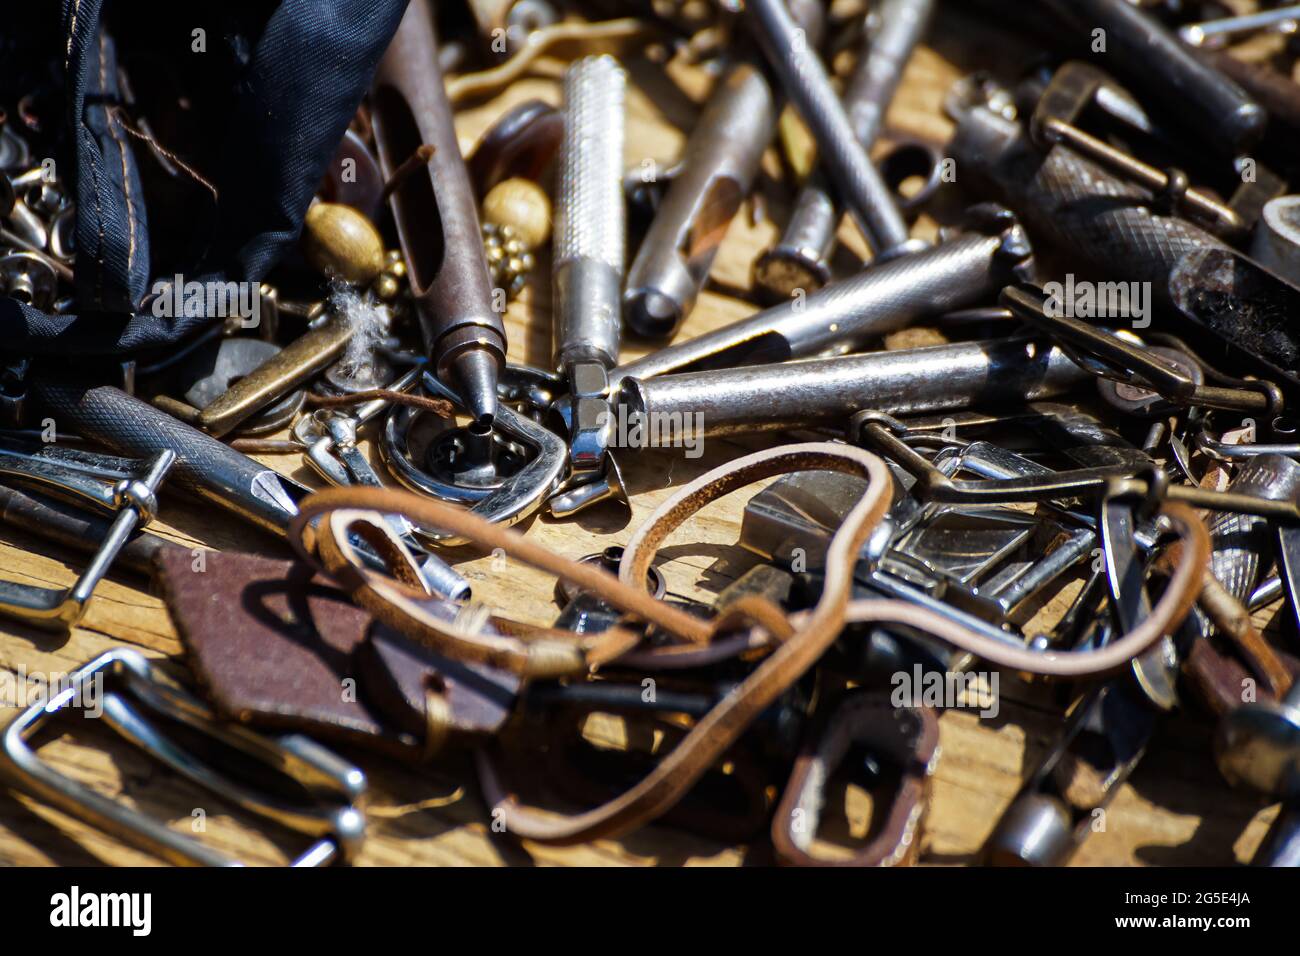 Bucharest, Romania - June 24, 2021: The leather tools of a traditional craftsman, at the Dimitrie Gusti National Village Museum, in Bucharest. Stock Photo